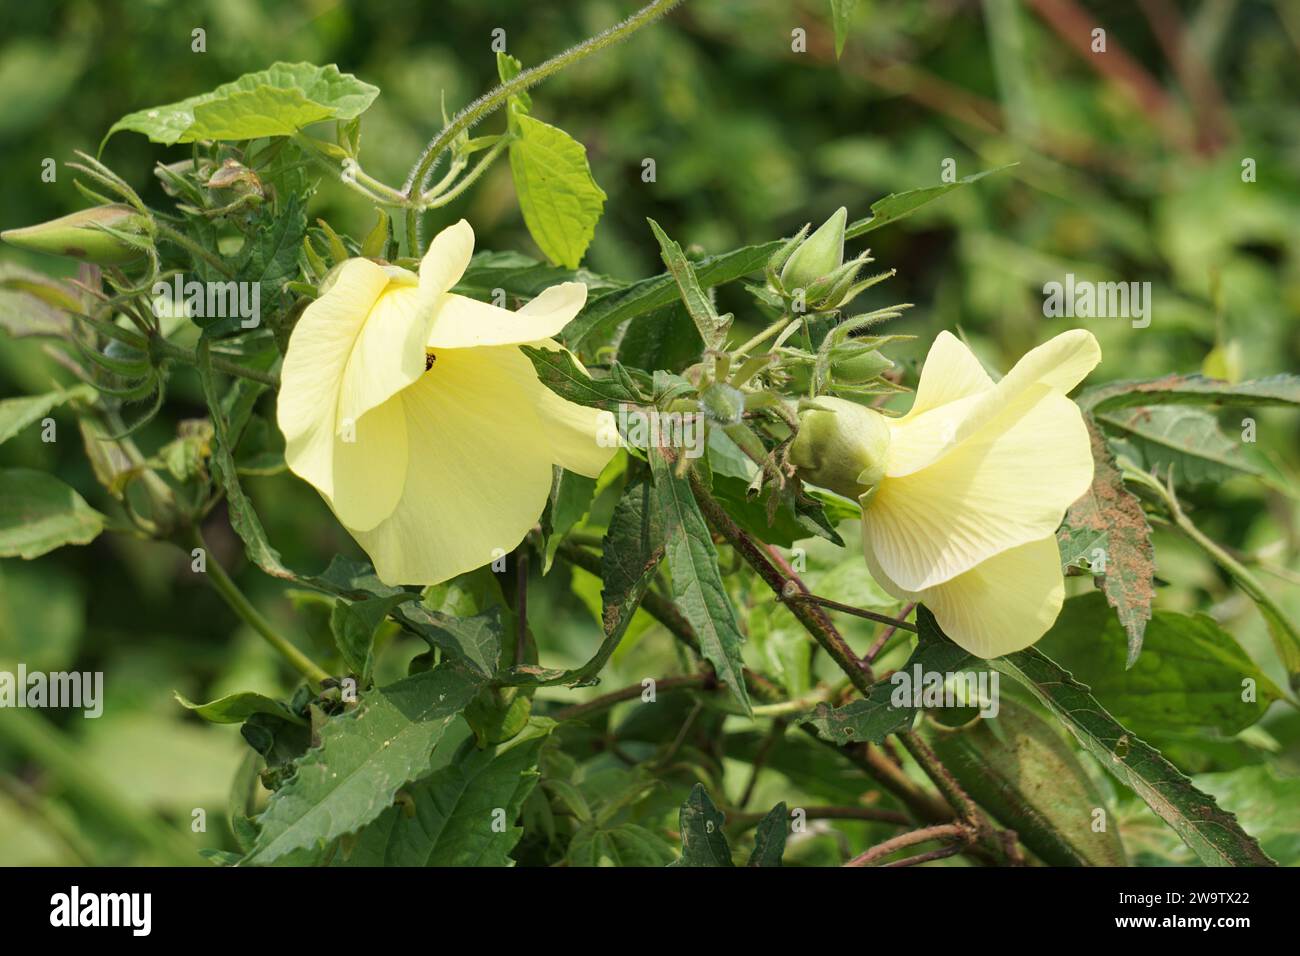 Abelmoschus moschatus. The plant has used in Ayurveda herbal medicine, including as an antispasmodi Stock Photo